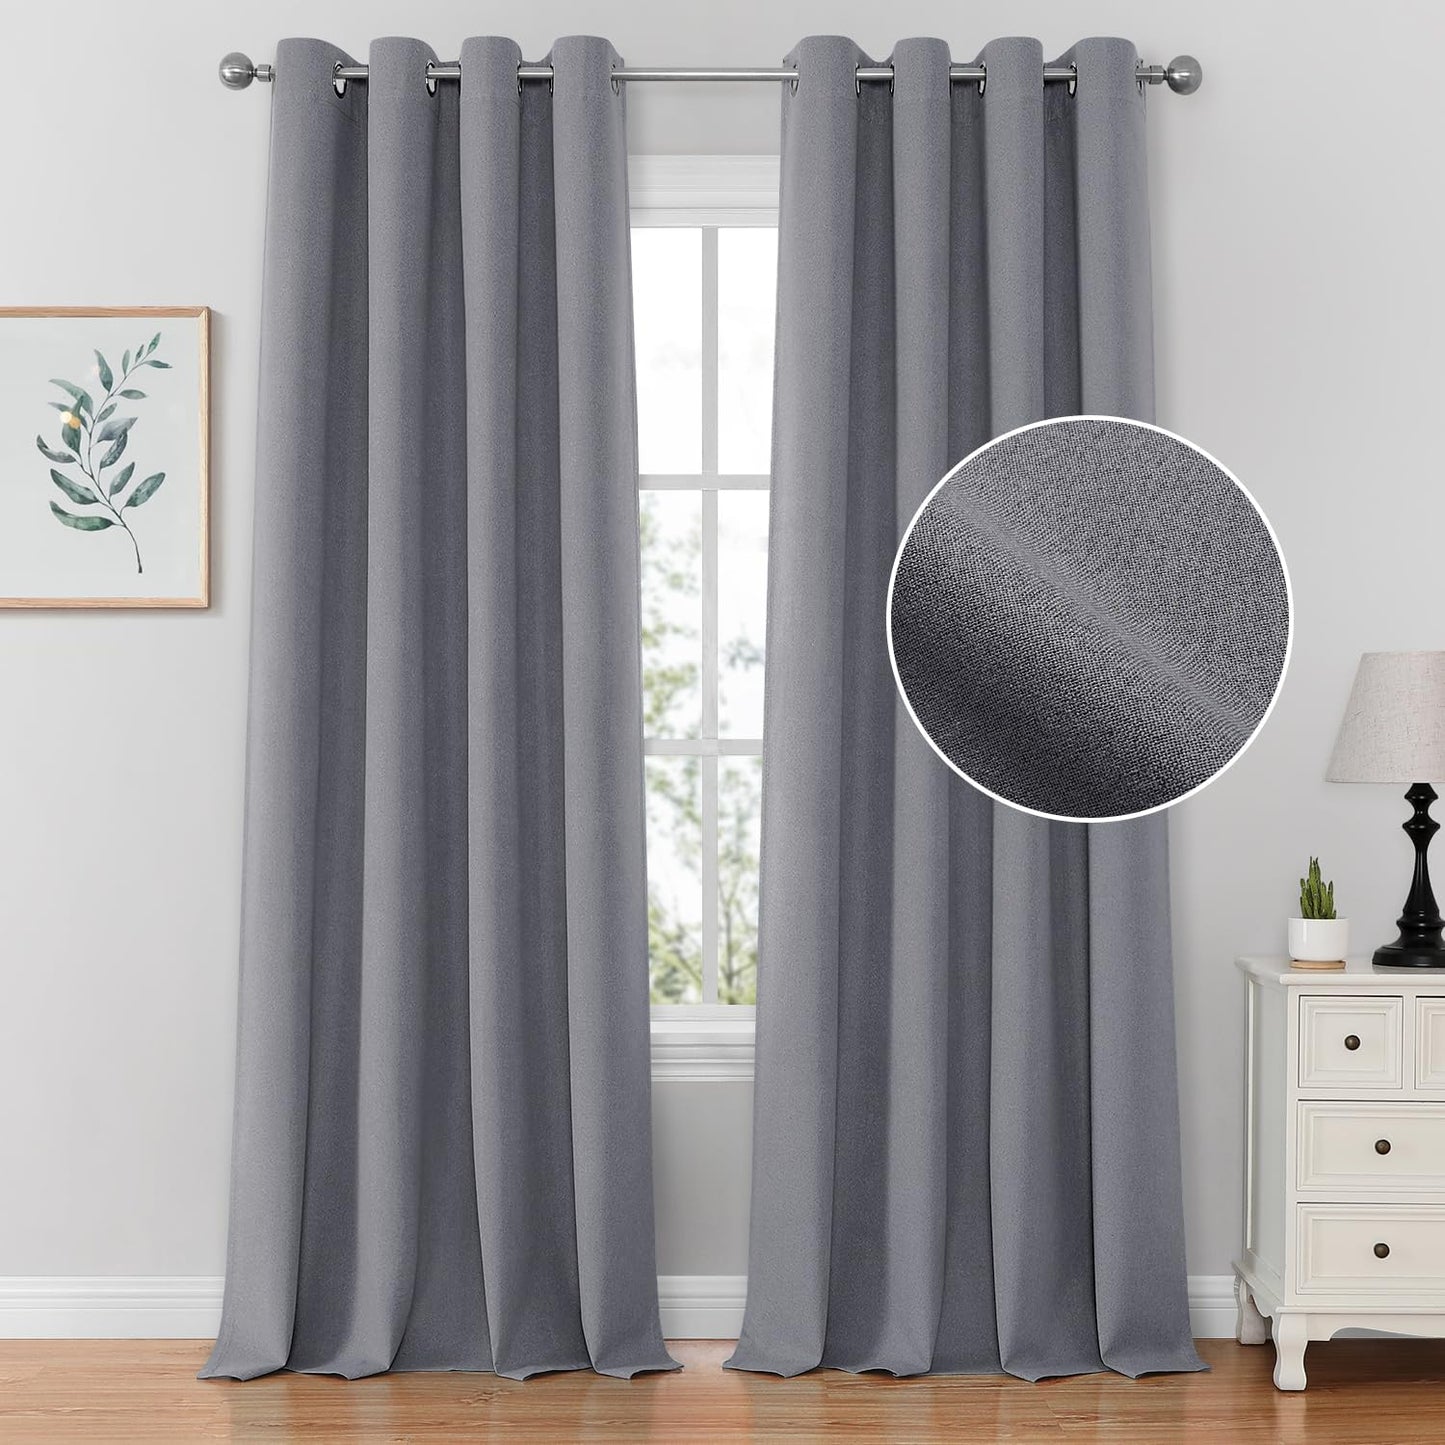 HOMEIDEAS 100% Blush Pink Linen Blackout Curtains for Bedroom, 52 X 84 Inch Room Darkening Curtains for Living, Faux Linen Thermal Insulated Full Black Out Grommet Window Curtains/Drapes  HOMEIDEAS Grey W52" X L84" 